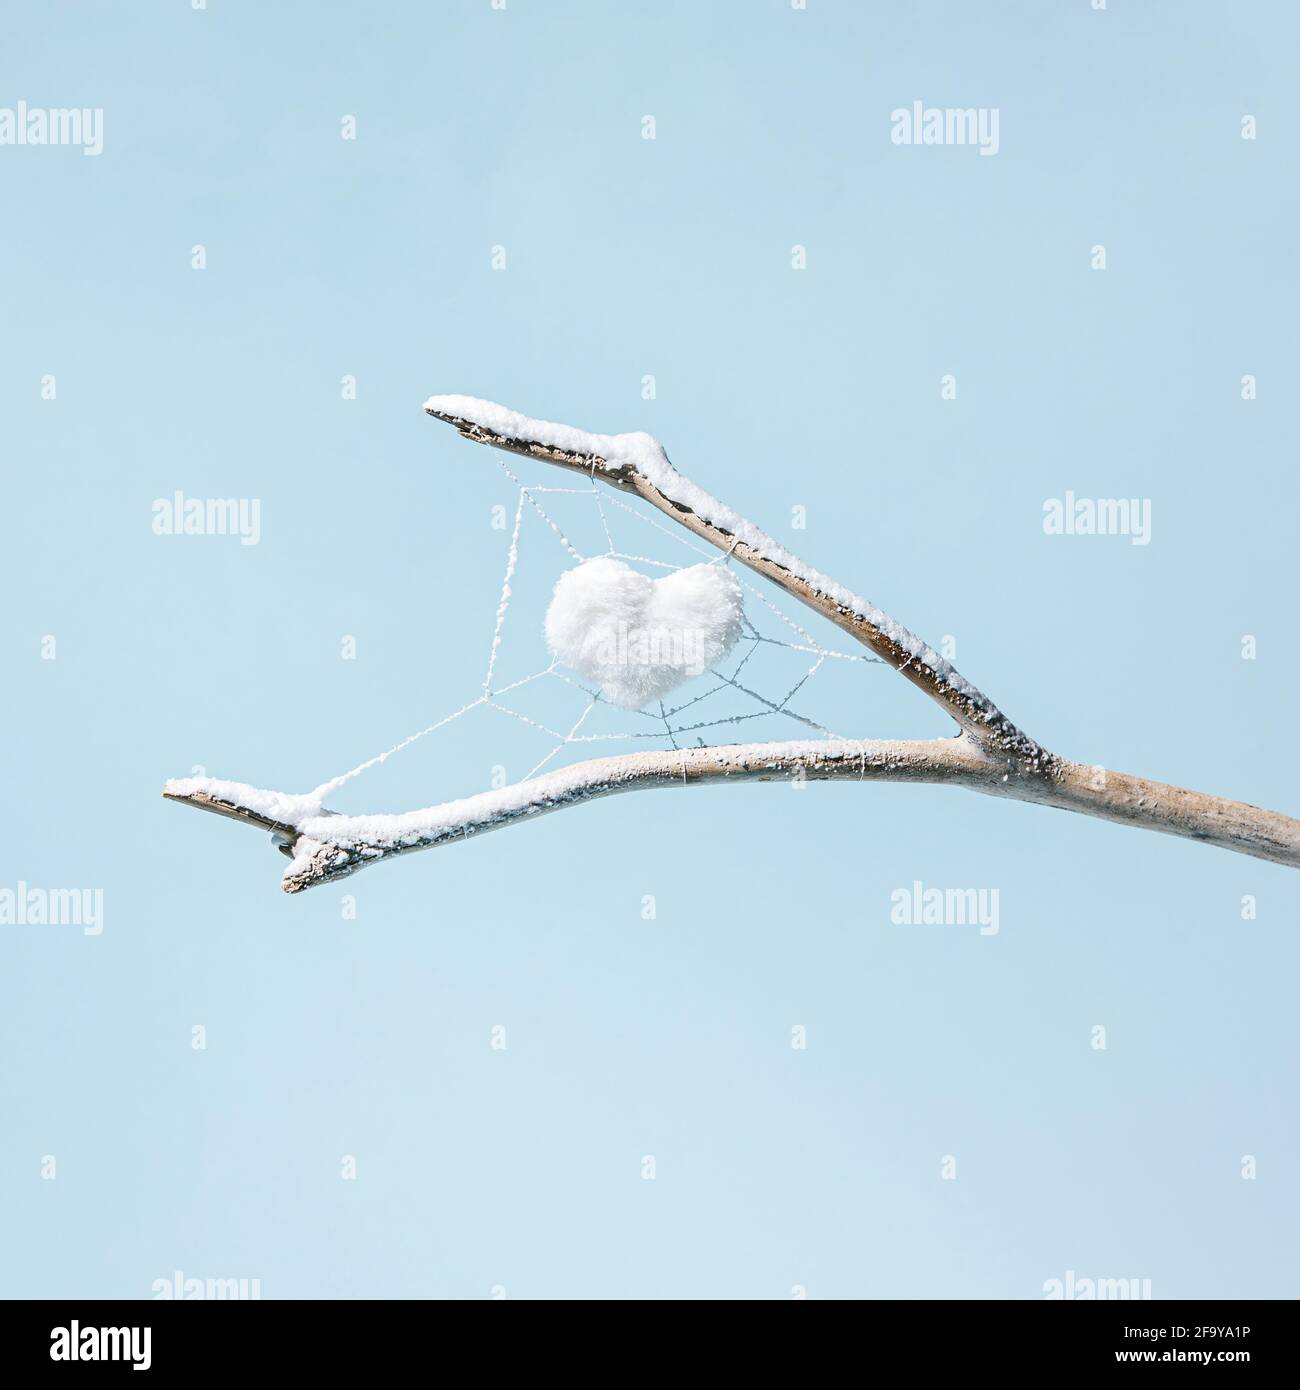 A white heart in a spider's web on a branch covered with snow isolated on a pastel blue background. Winter motif. Horizontal photo layout. Copy space. Stock Photo